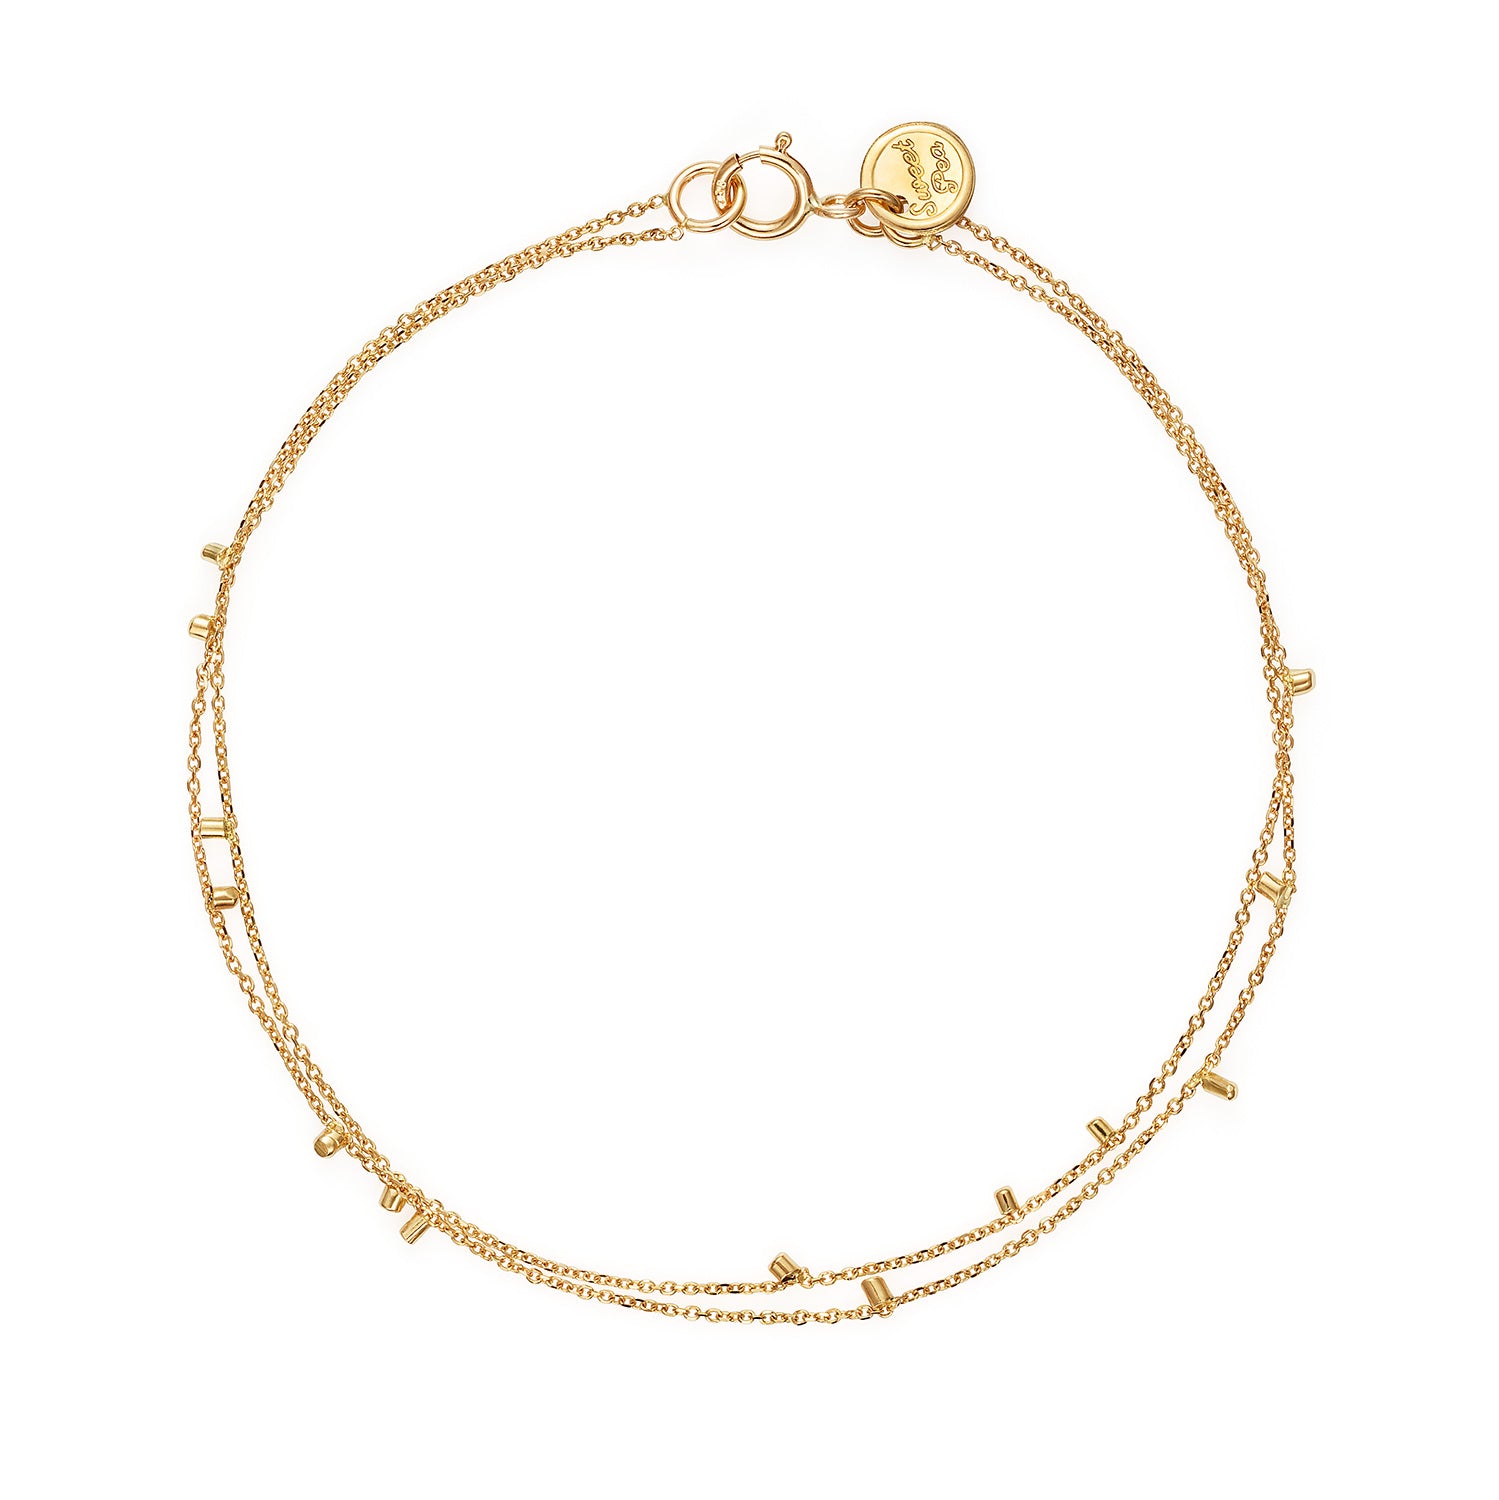 This cute 18ct yellow double strand bracelet is made of fine chain sprinkled with a shimmering of gold embellishments and is part of our Gold Dust Collection.